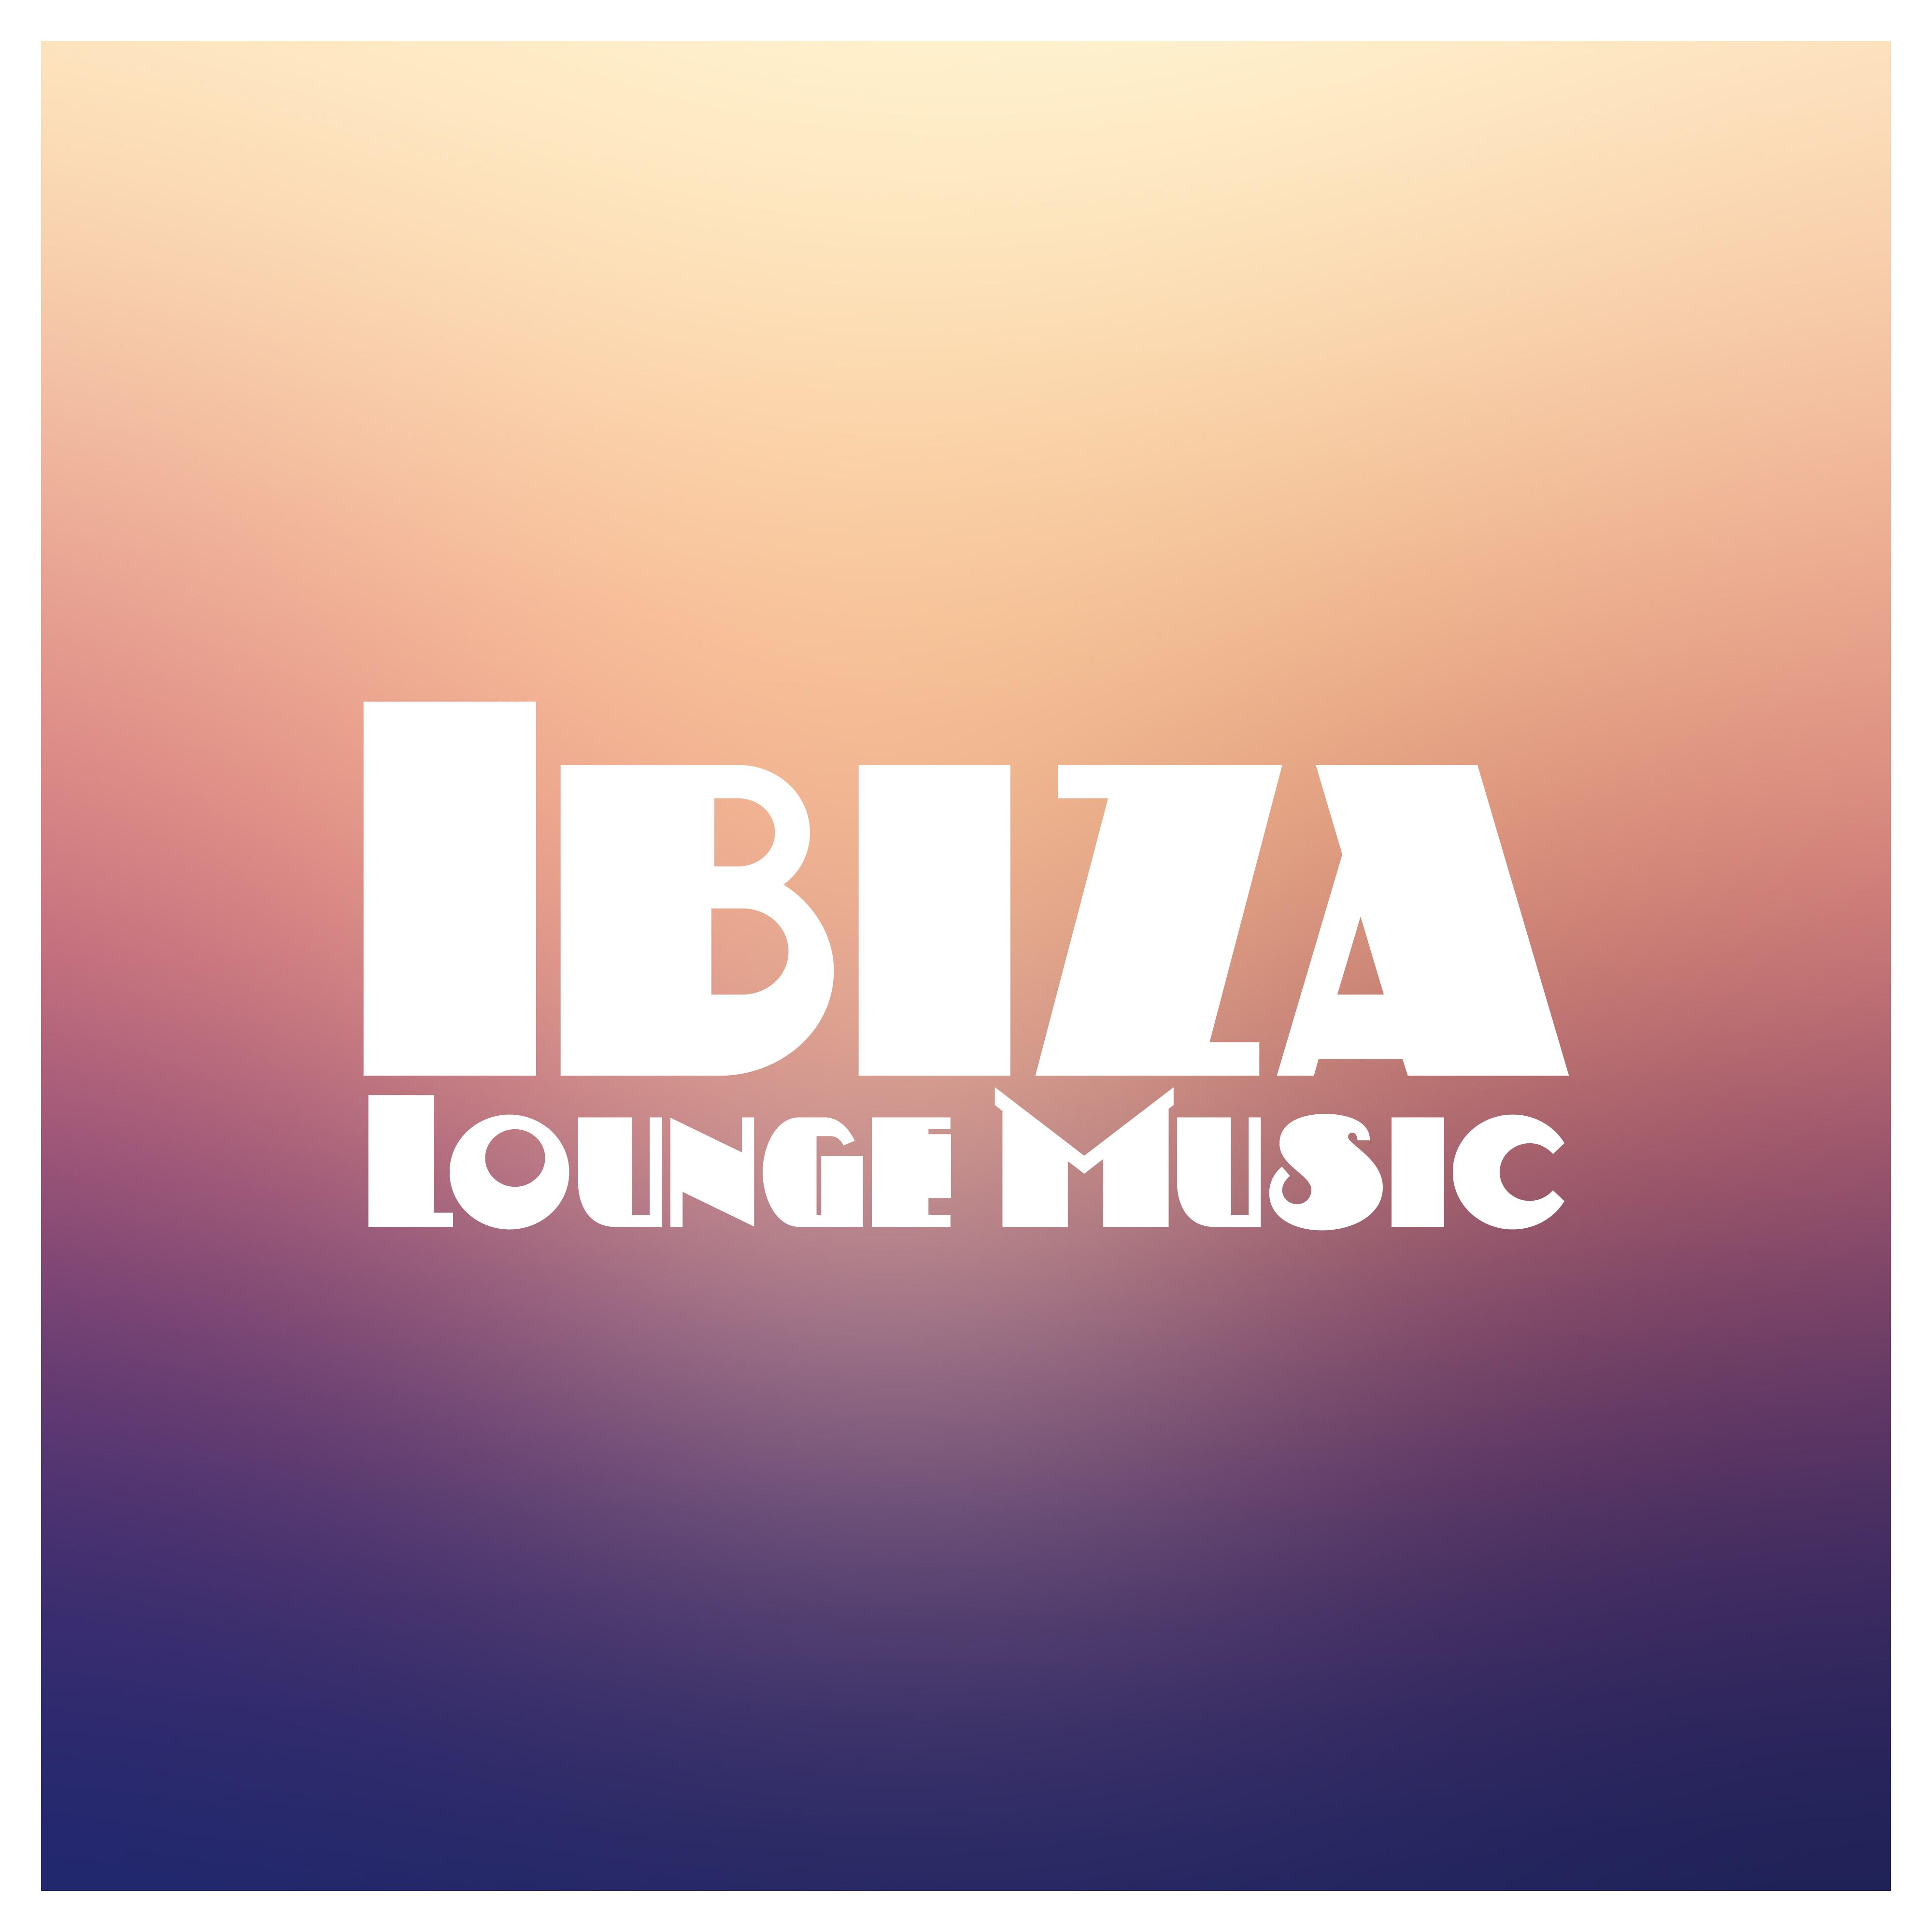 Ibiza Lounge Music  Summer Sounds, Peaceful Melodies, Relaxing Music, Chill Out Songs, Ibiza Relaxation